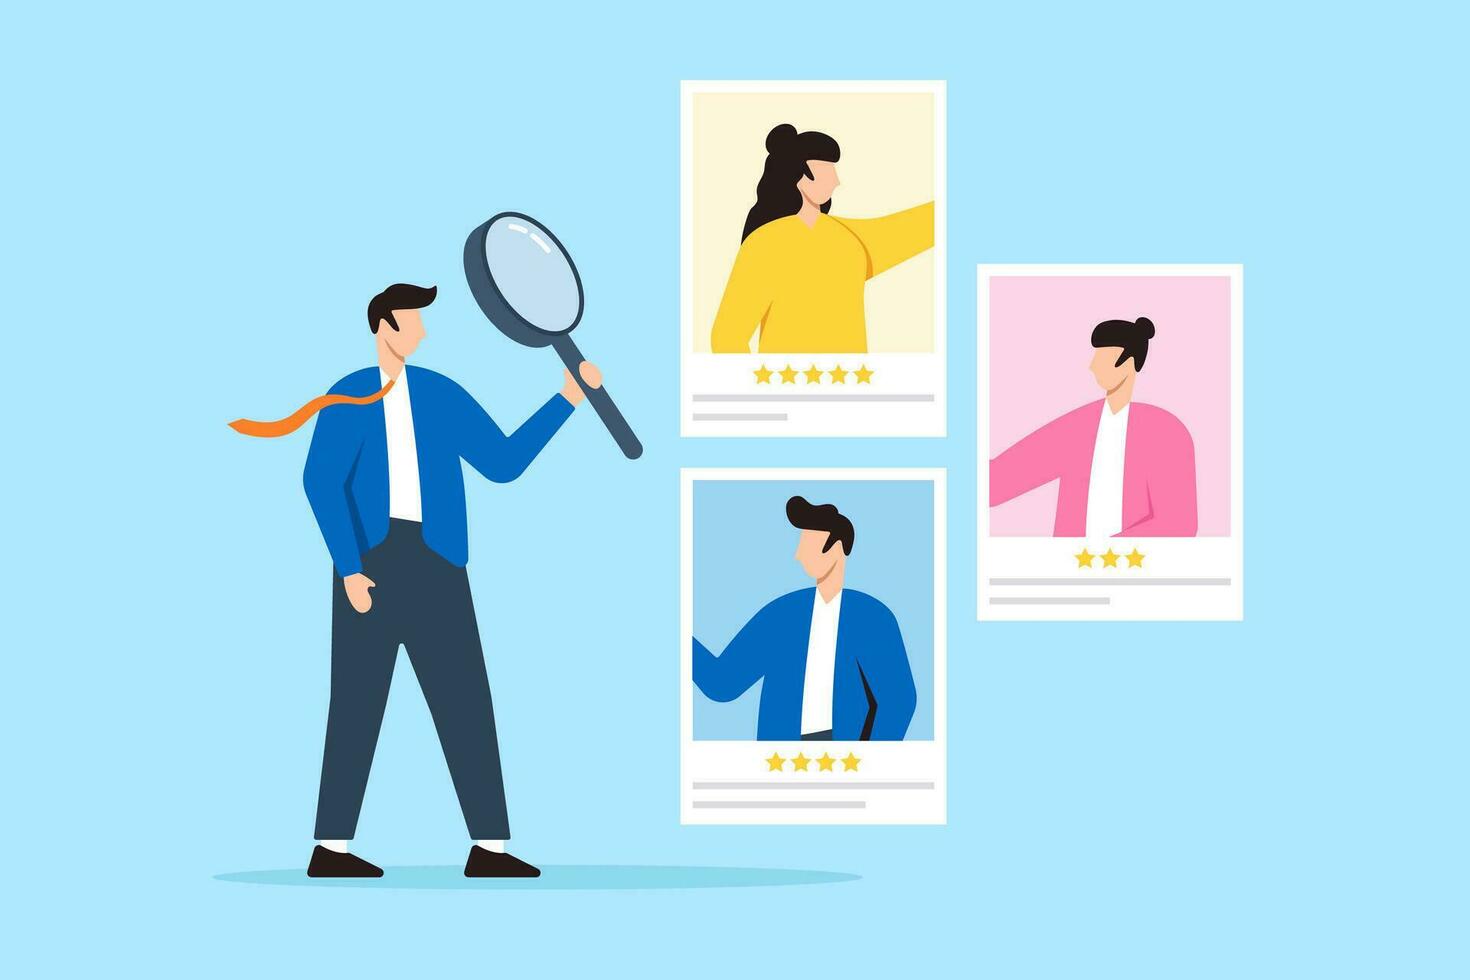 HR recruiter analyzing candidate with magnifying glass in flat design vector